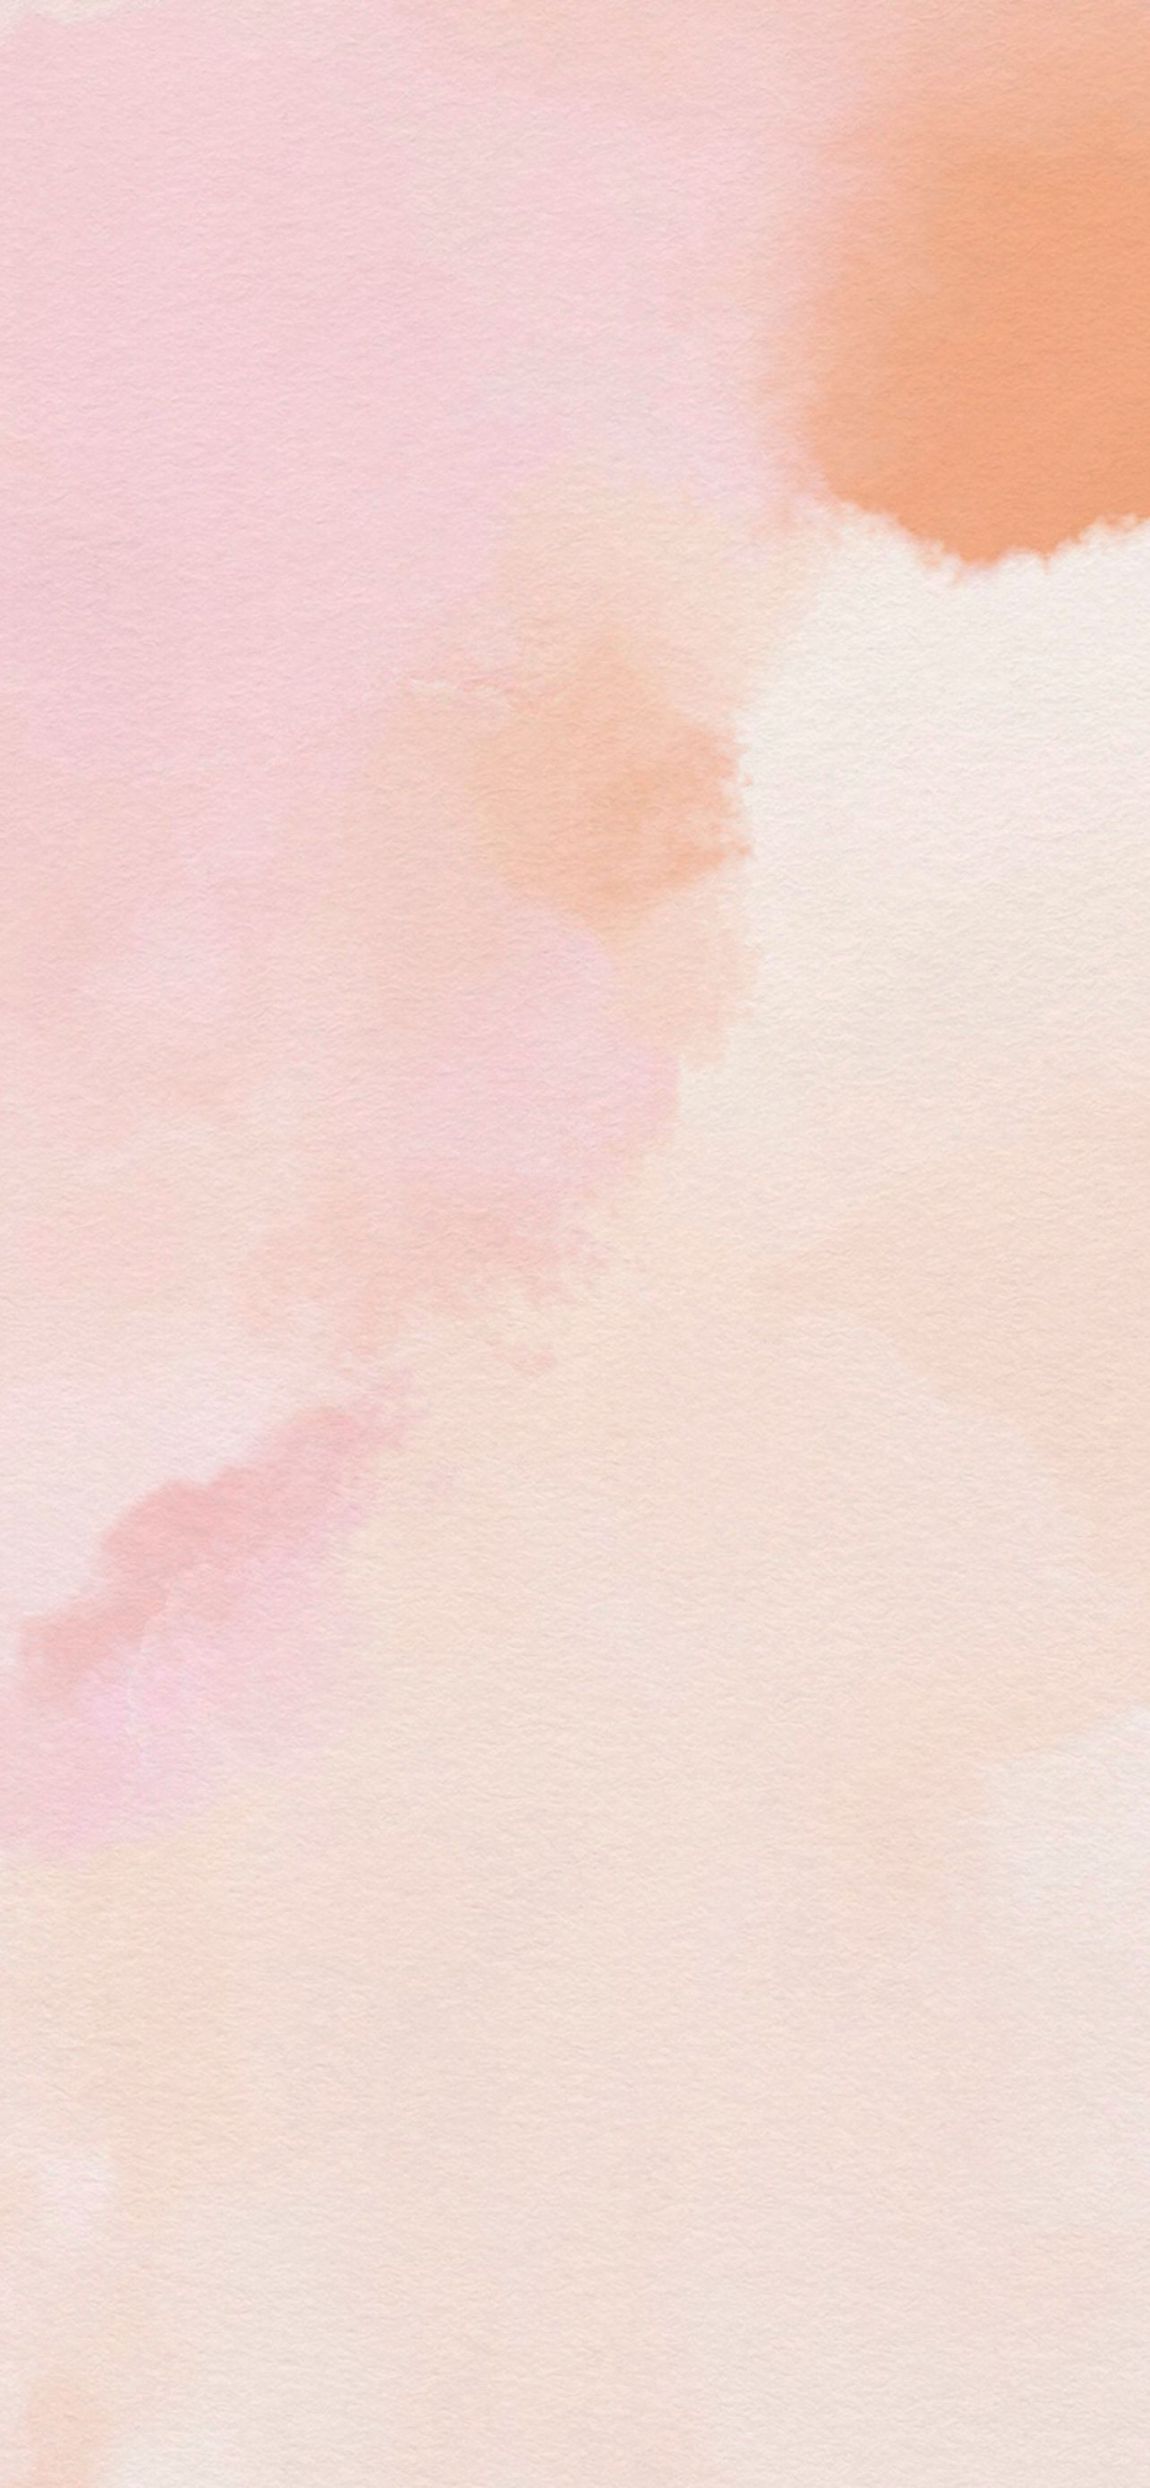 A watercolor background with pink and orange hues - Watercolor